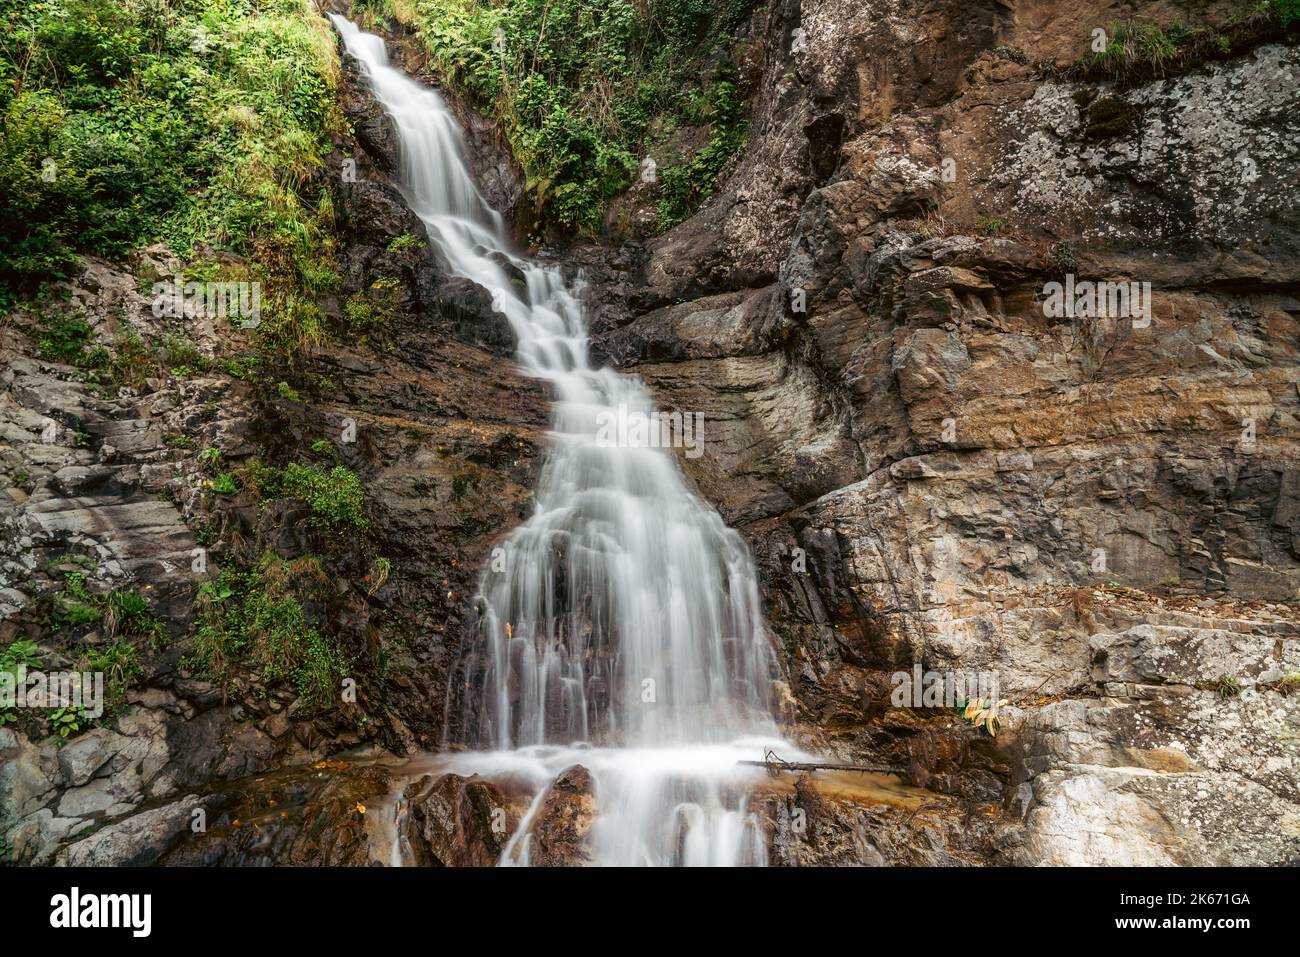 A stunning view of a waterfall in a green forest. High quality photo Stock Photo